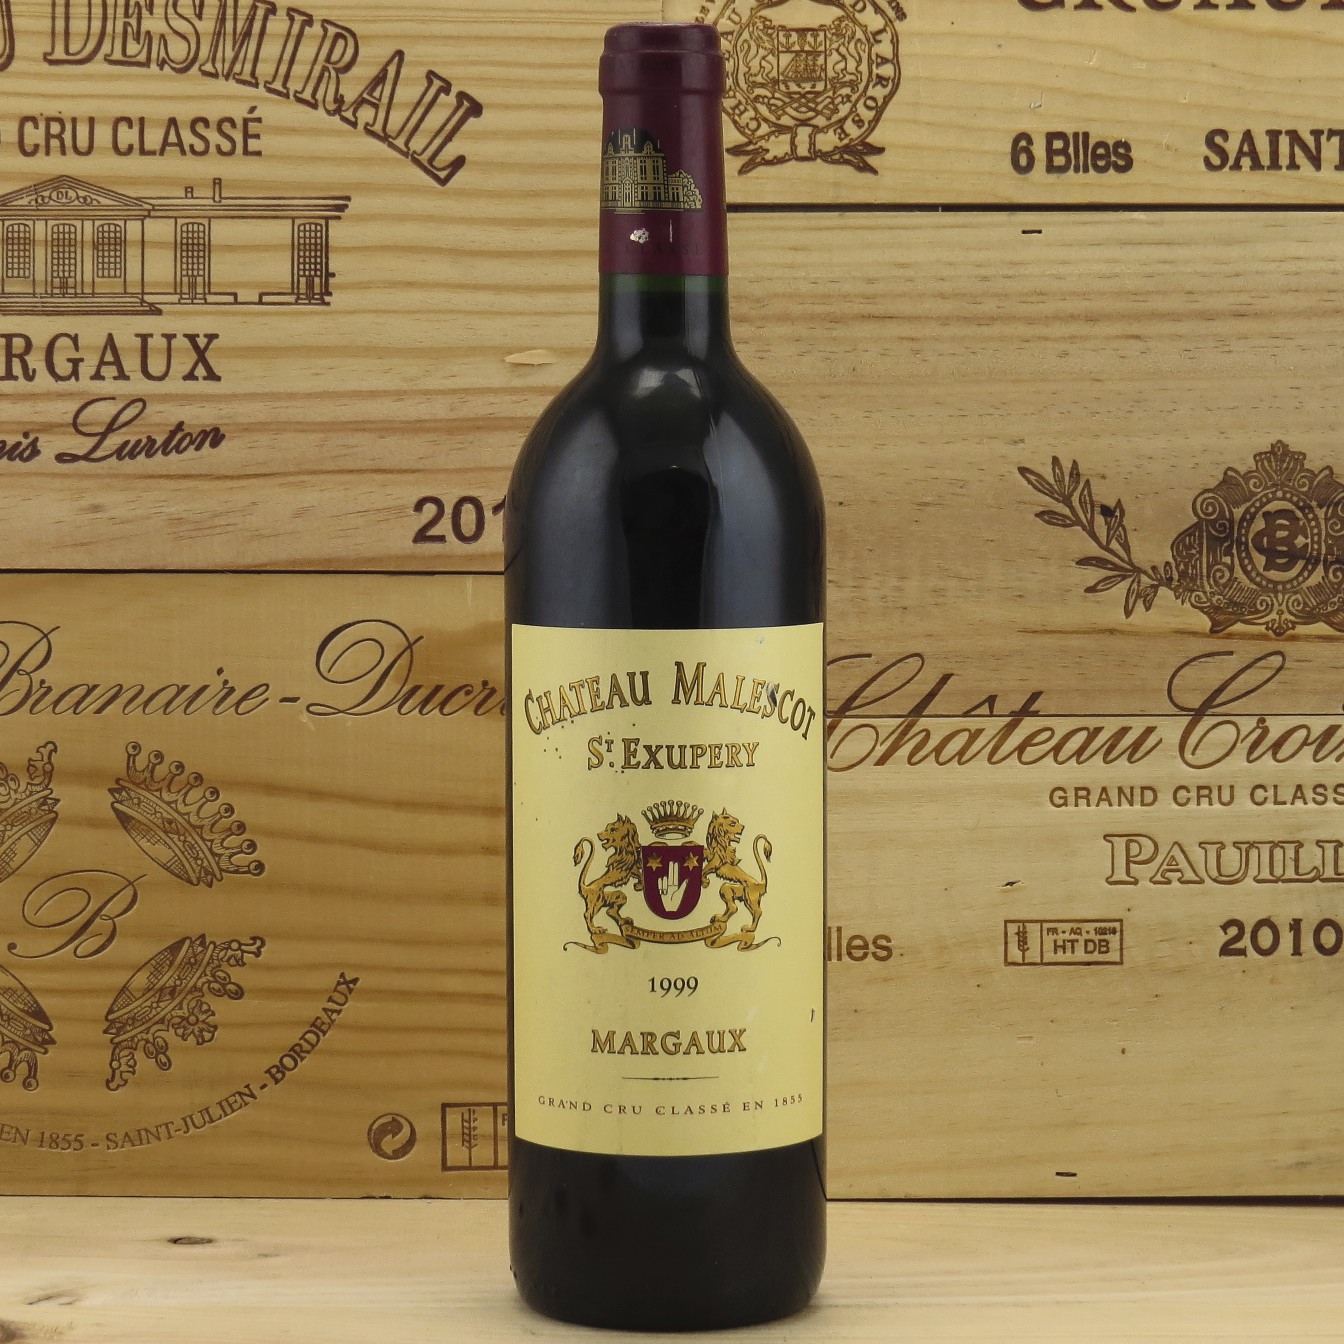 1999 Chateau Malescot St. Exupery